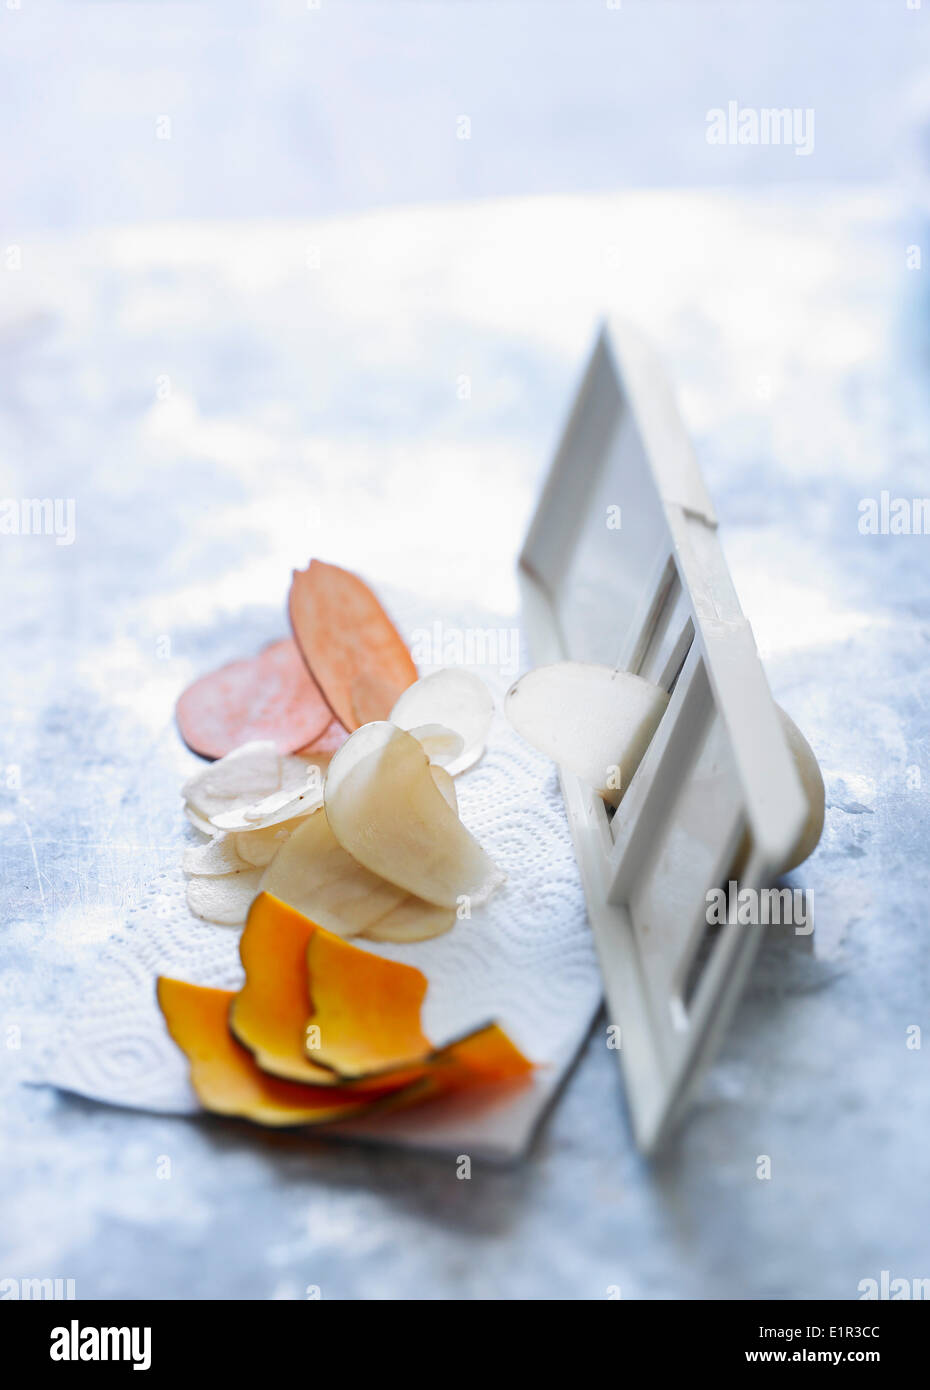 Thinl slicing vegetables with a mandoline Stock Photo